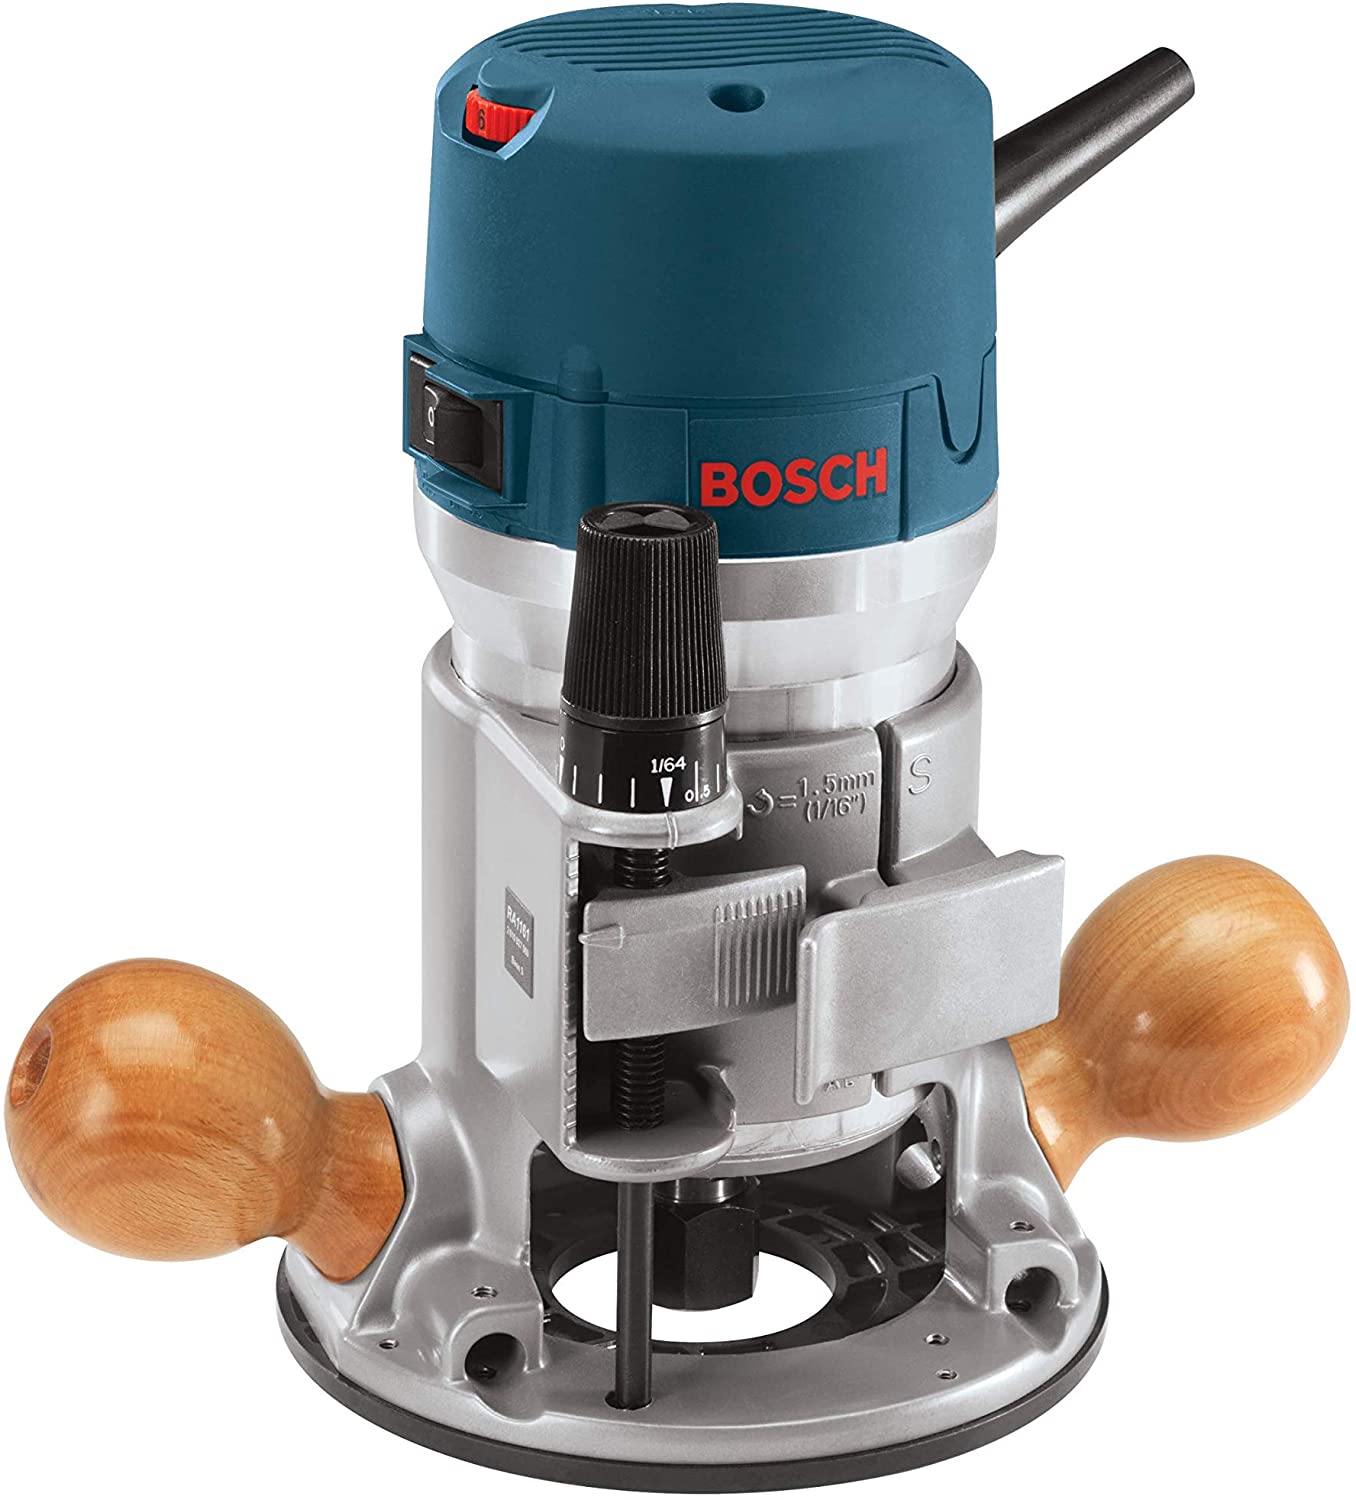 Bosch 1617EVSPK Wood Router + Plunge Base + Deluxe Router Edge Guide + Dust Extraction Hood/Vacuum Hose Adapter - $161